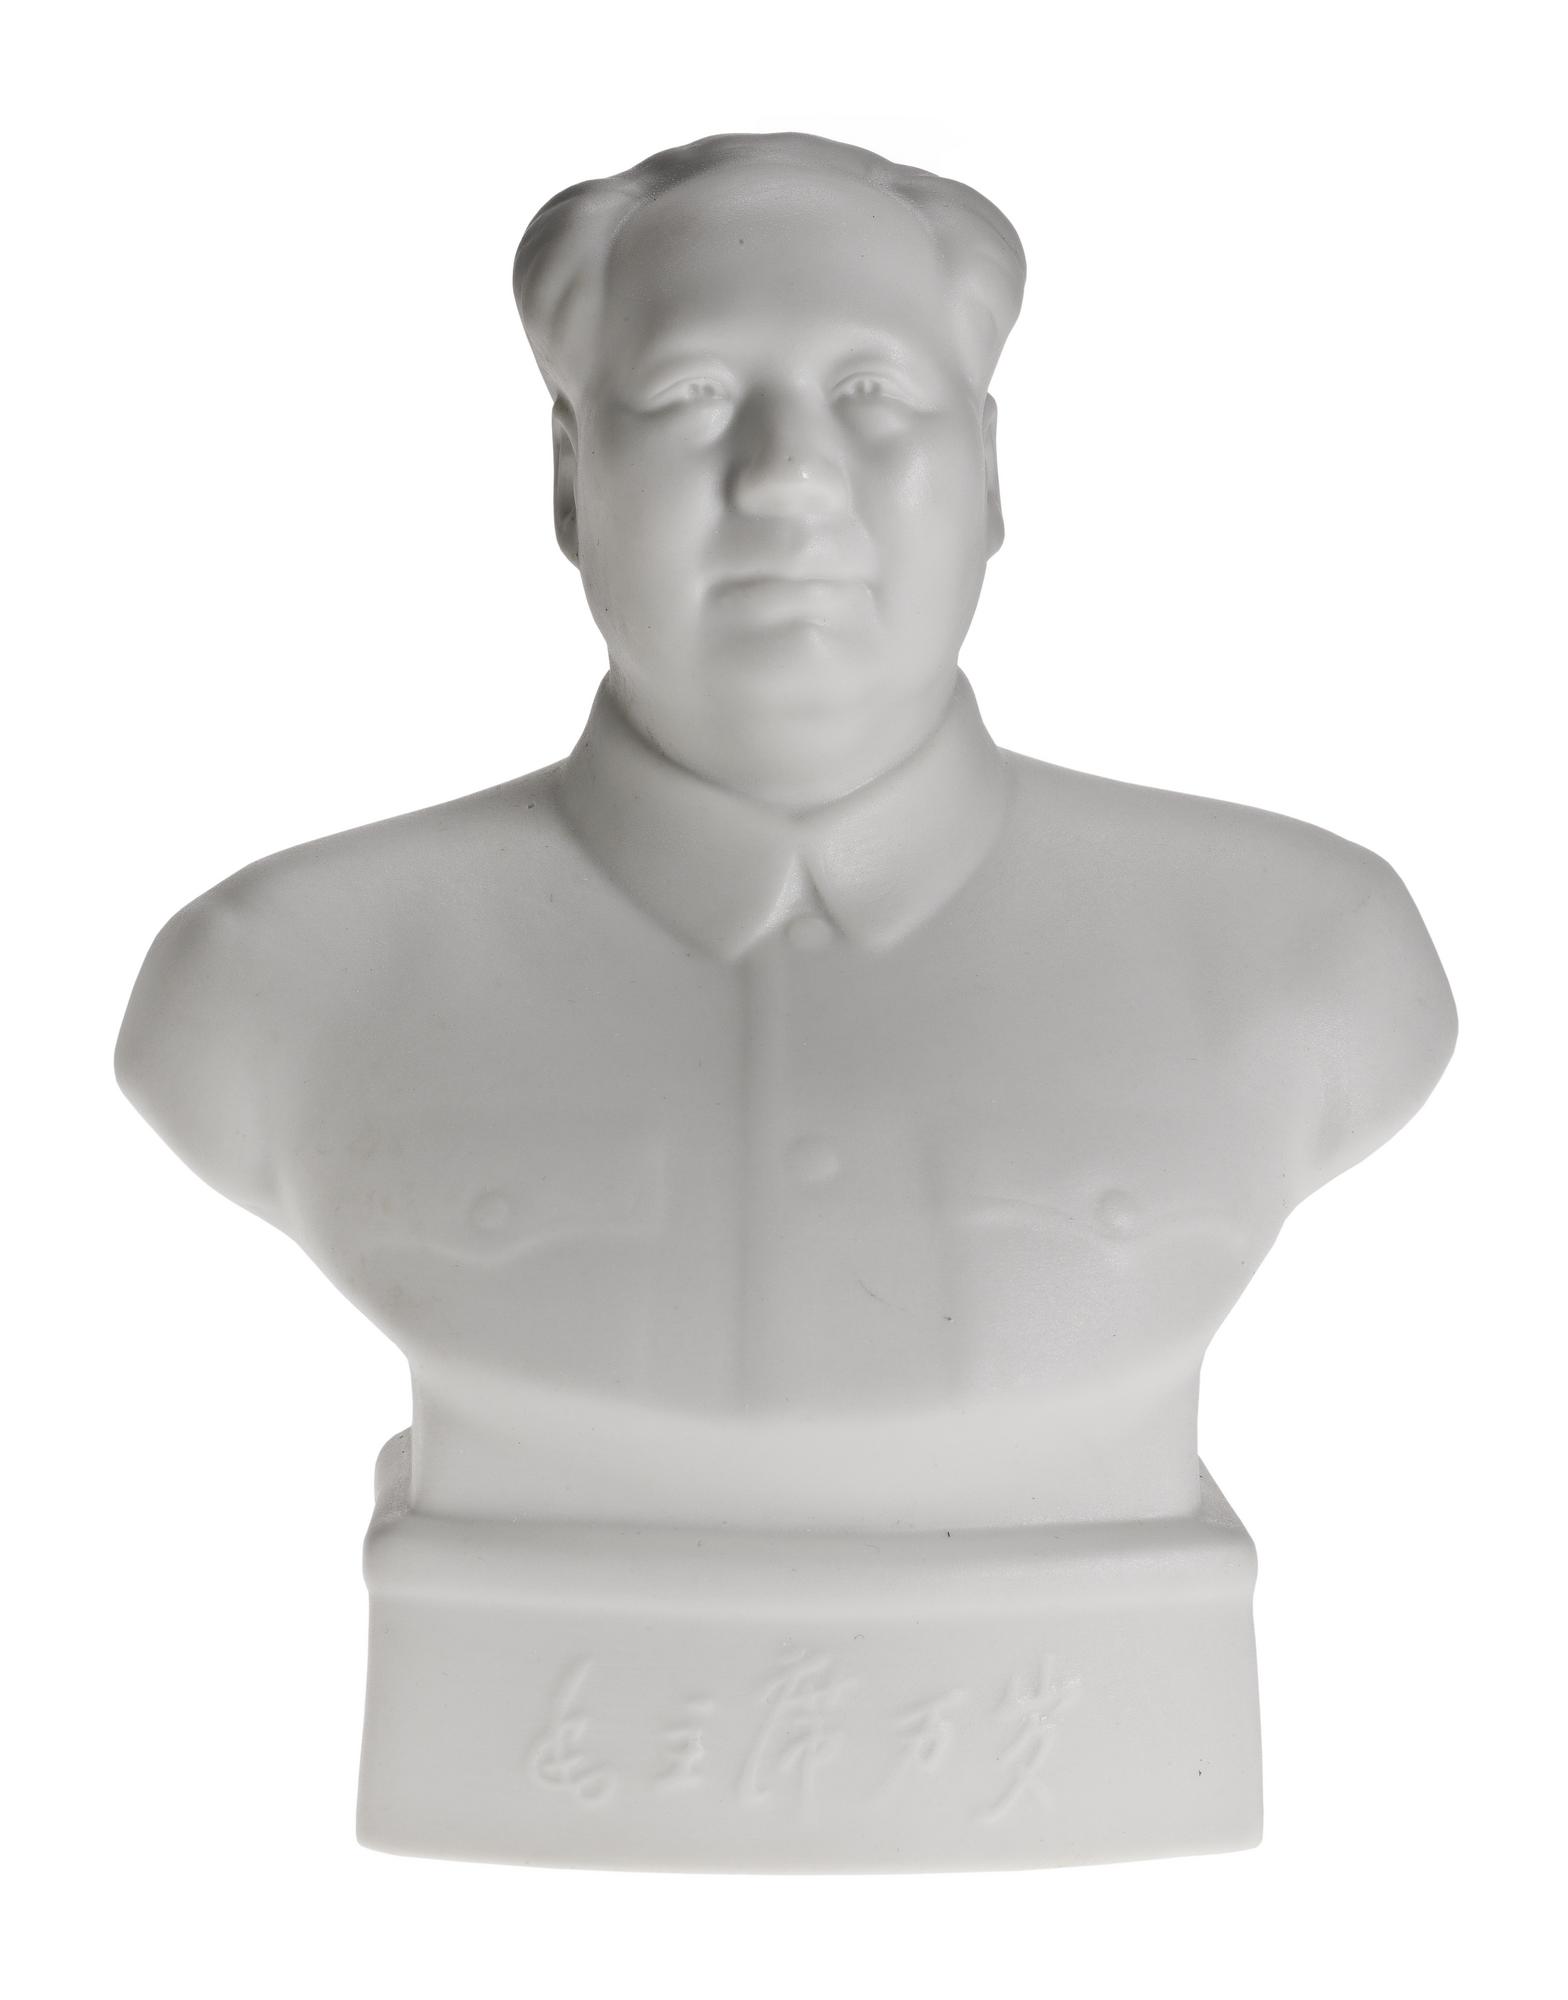 Bust of Chairman Mao Zedong, of the finest white biscuit porcelain with smear glaze, an official issue bust, the only sculptural image to be distributed to all official buildings throughout China, part of a consignment intended for distribution in Tibet: China, 1966.